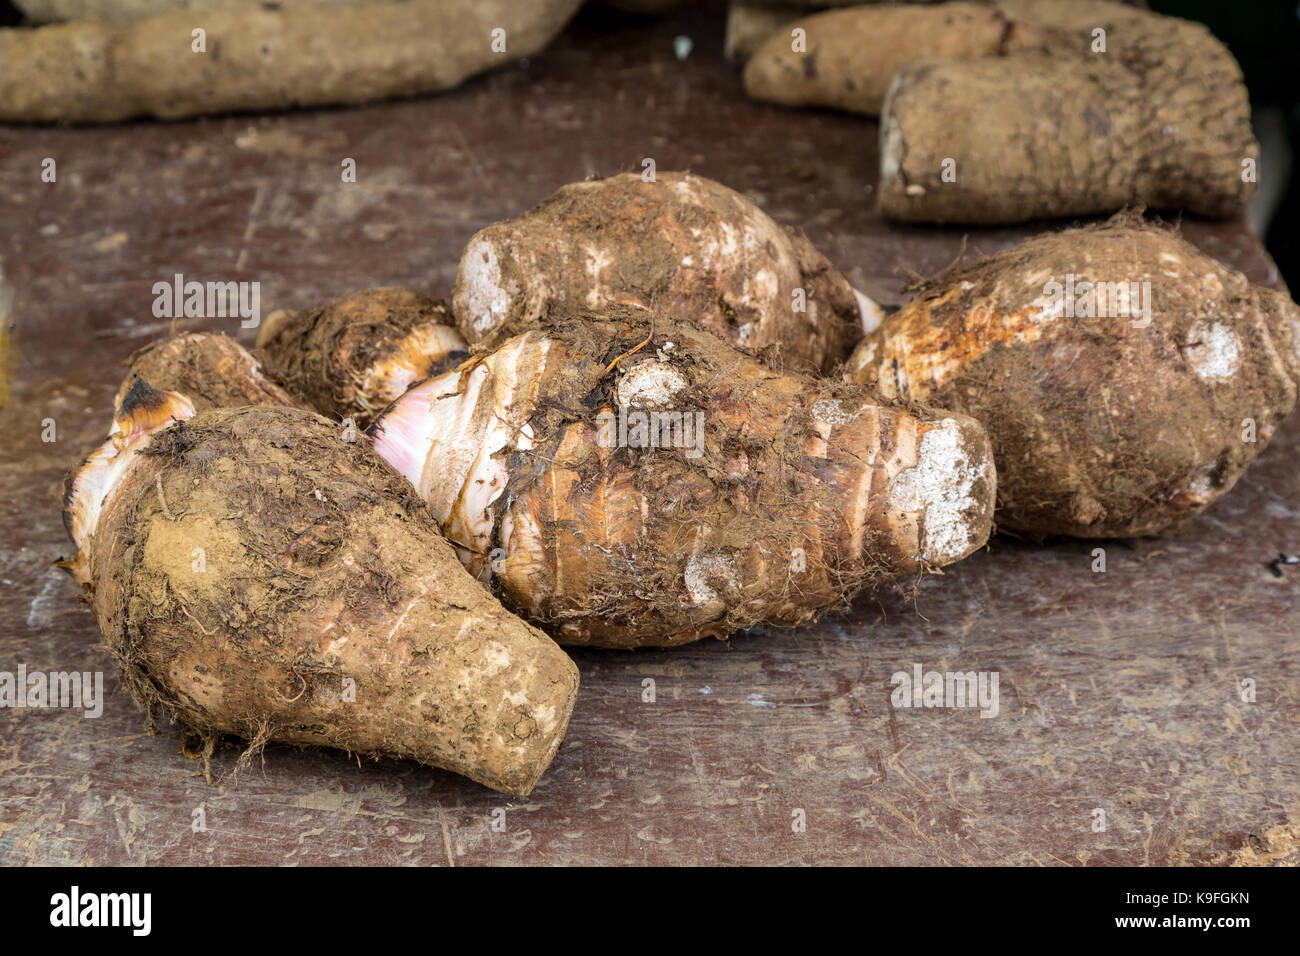 Fort-de-France, Martinique.  Eddo, a Starchy Root. Stock Photo